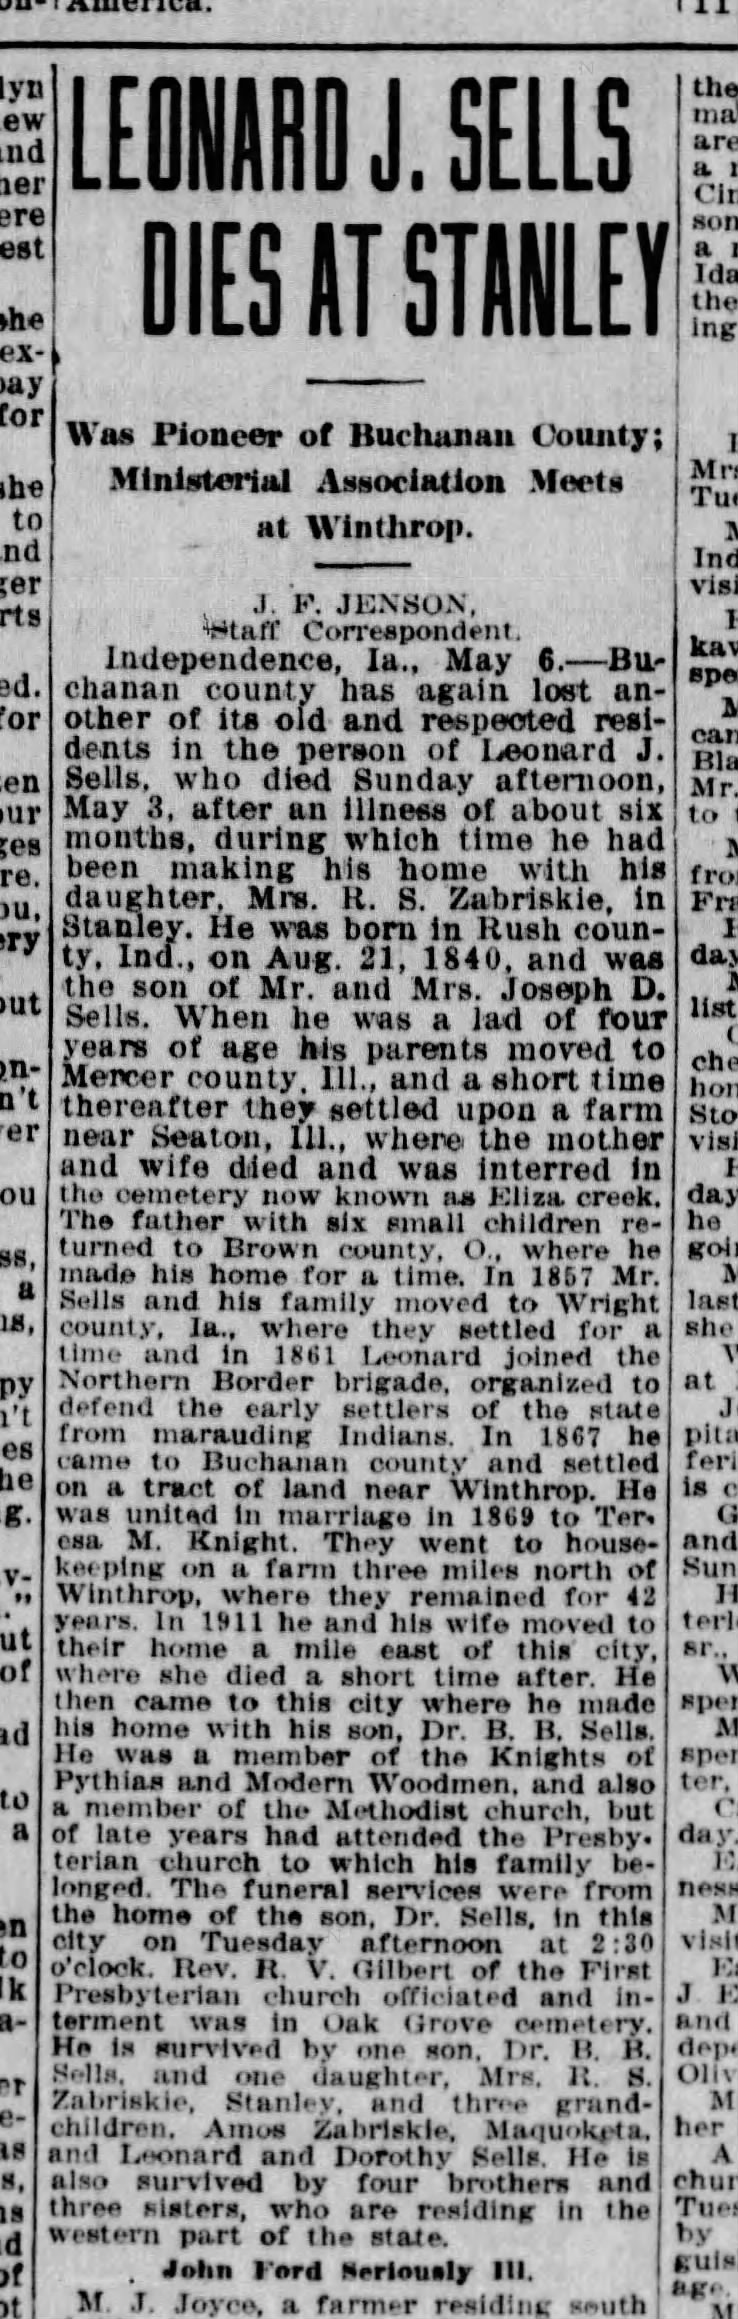 Leonard J. Sells - d. 6 May 1925, Wed.
Page 19 
The courier (Waterloo, Iowa)